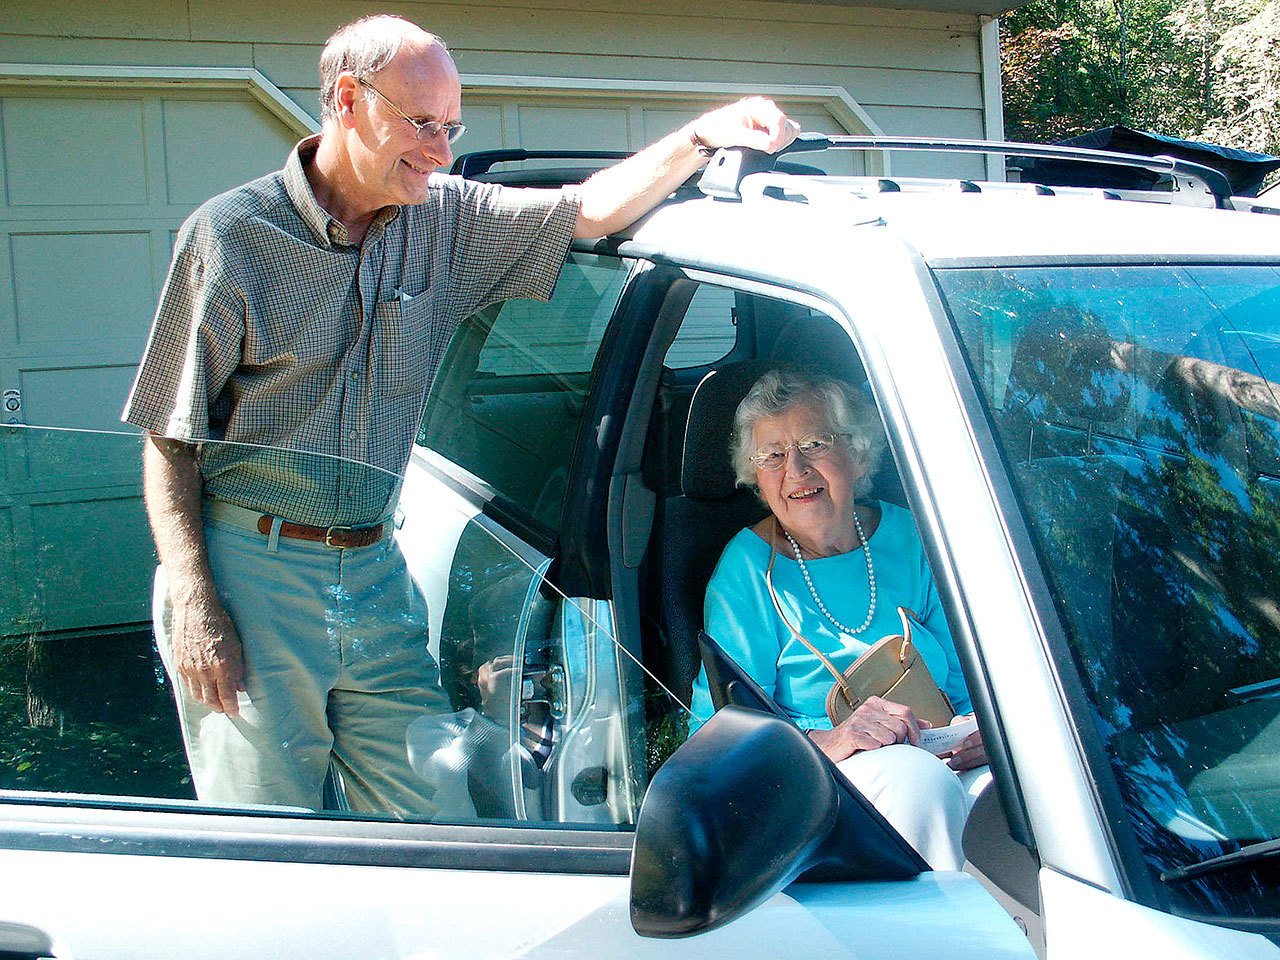 Courtesy Photo                                Volunteer drivers like Helmut are needed to help provide transportation services to senior citizens.